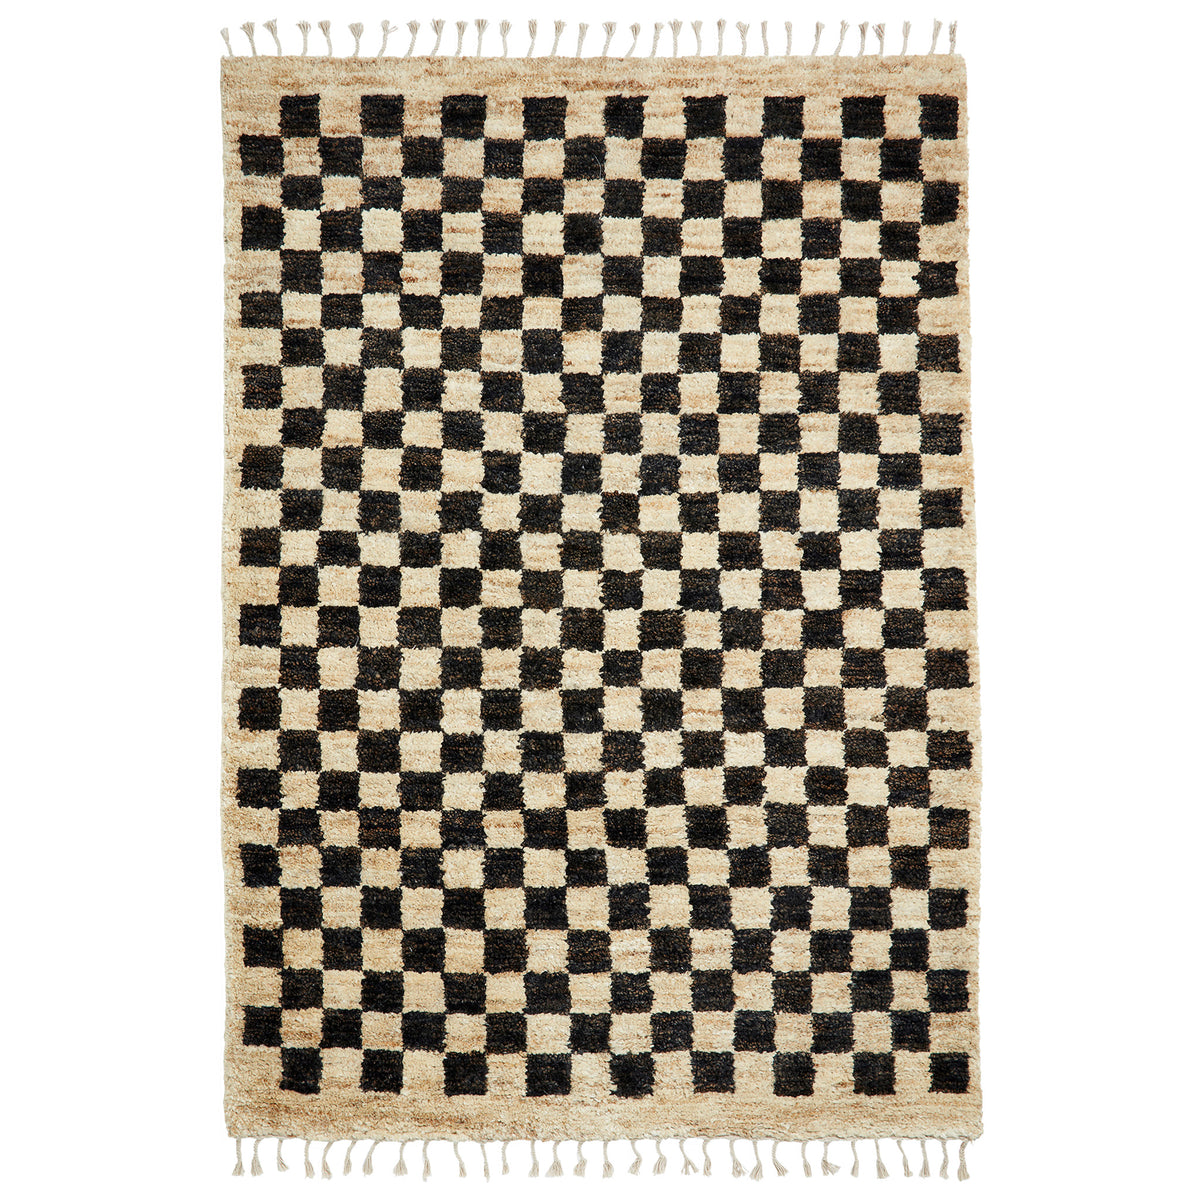 Franklin Natural Hemp Black/Ivory Chequered Rug from Roseland Furniture